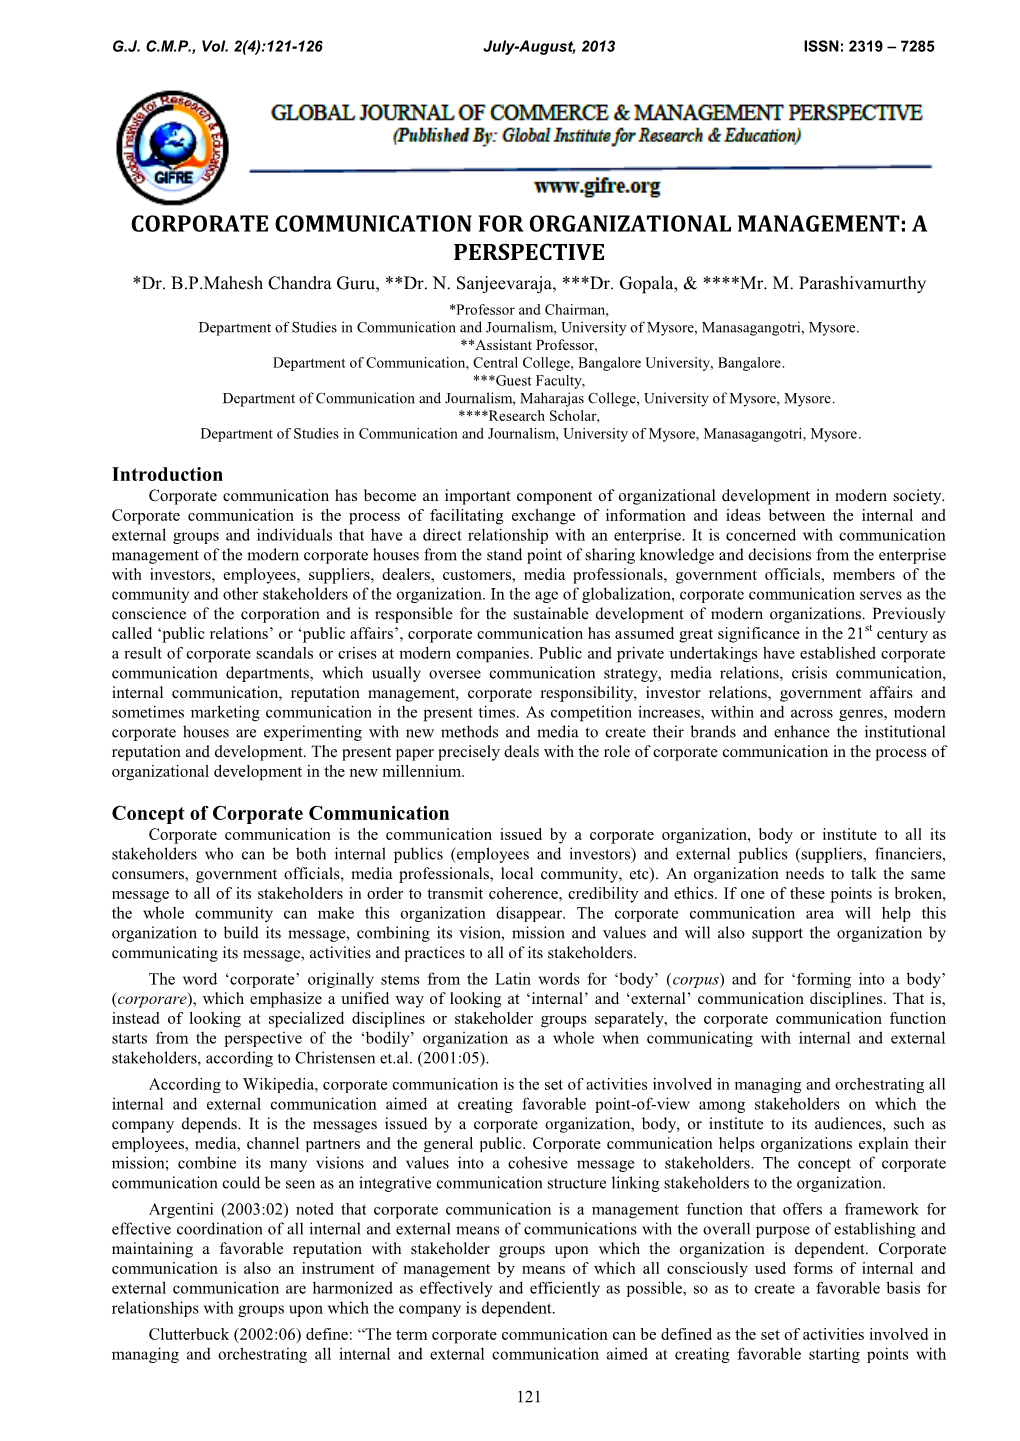 CORPORATE COMMUNICATION for ORGANIZATIONAL MANAGEMENT: a PERSPECTIVE *Dr